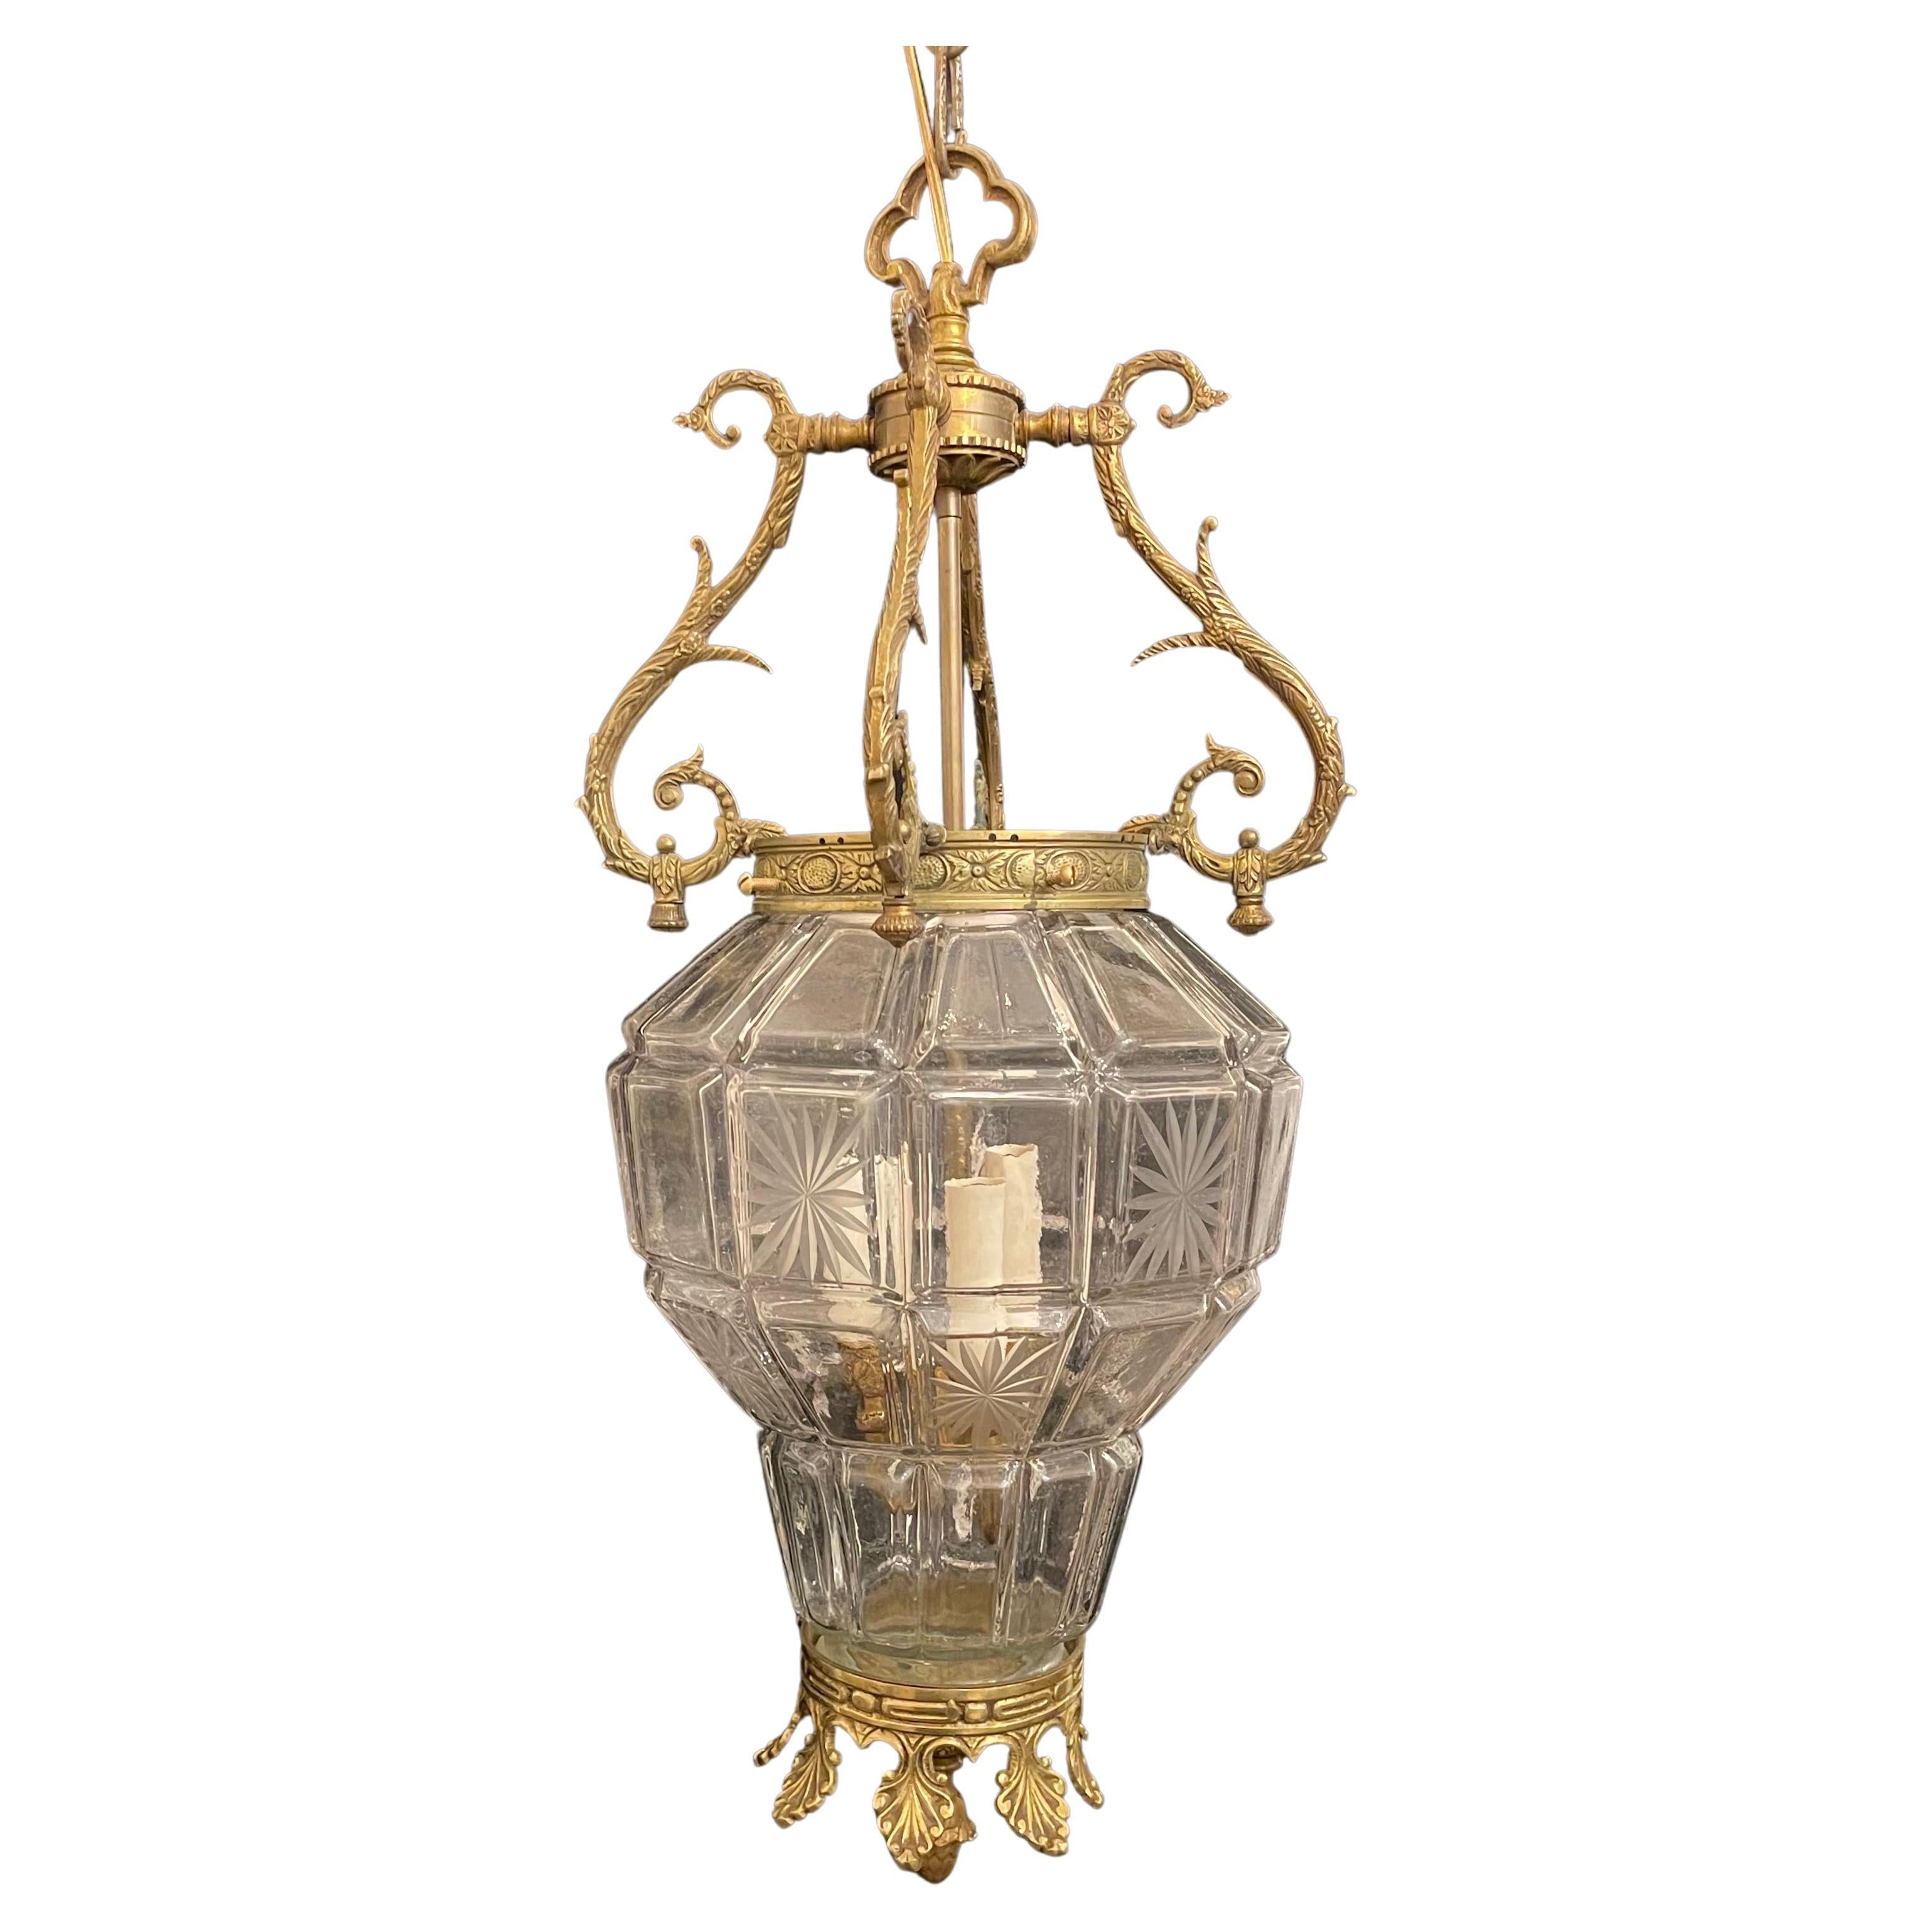 A wonderful large french bronze regency empire style etched panel glass lantern fixture with 3 candelabra lights on the interior.